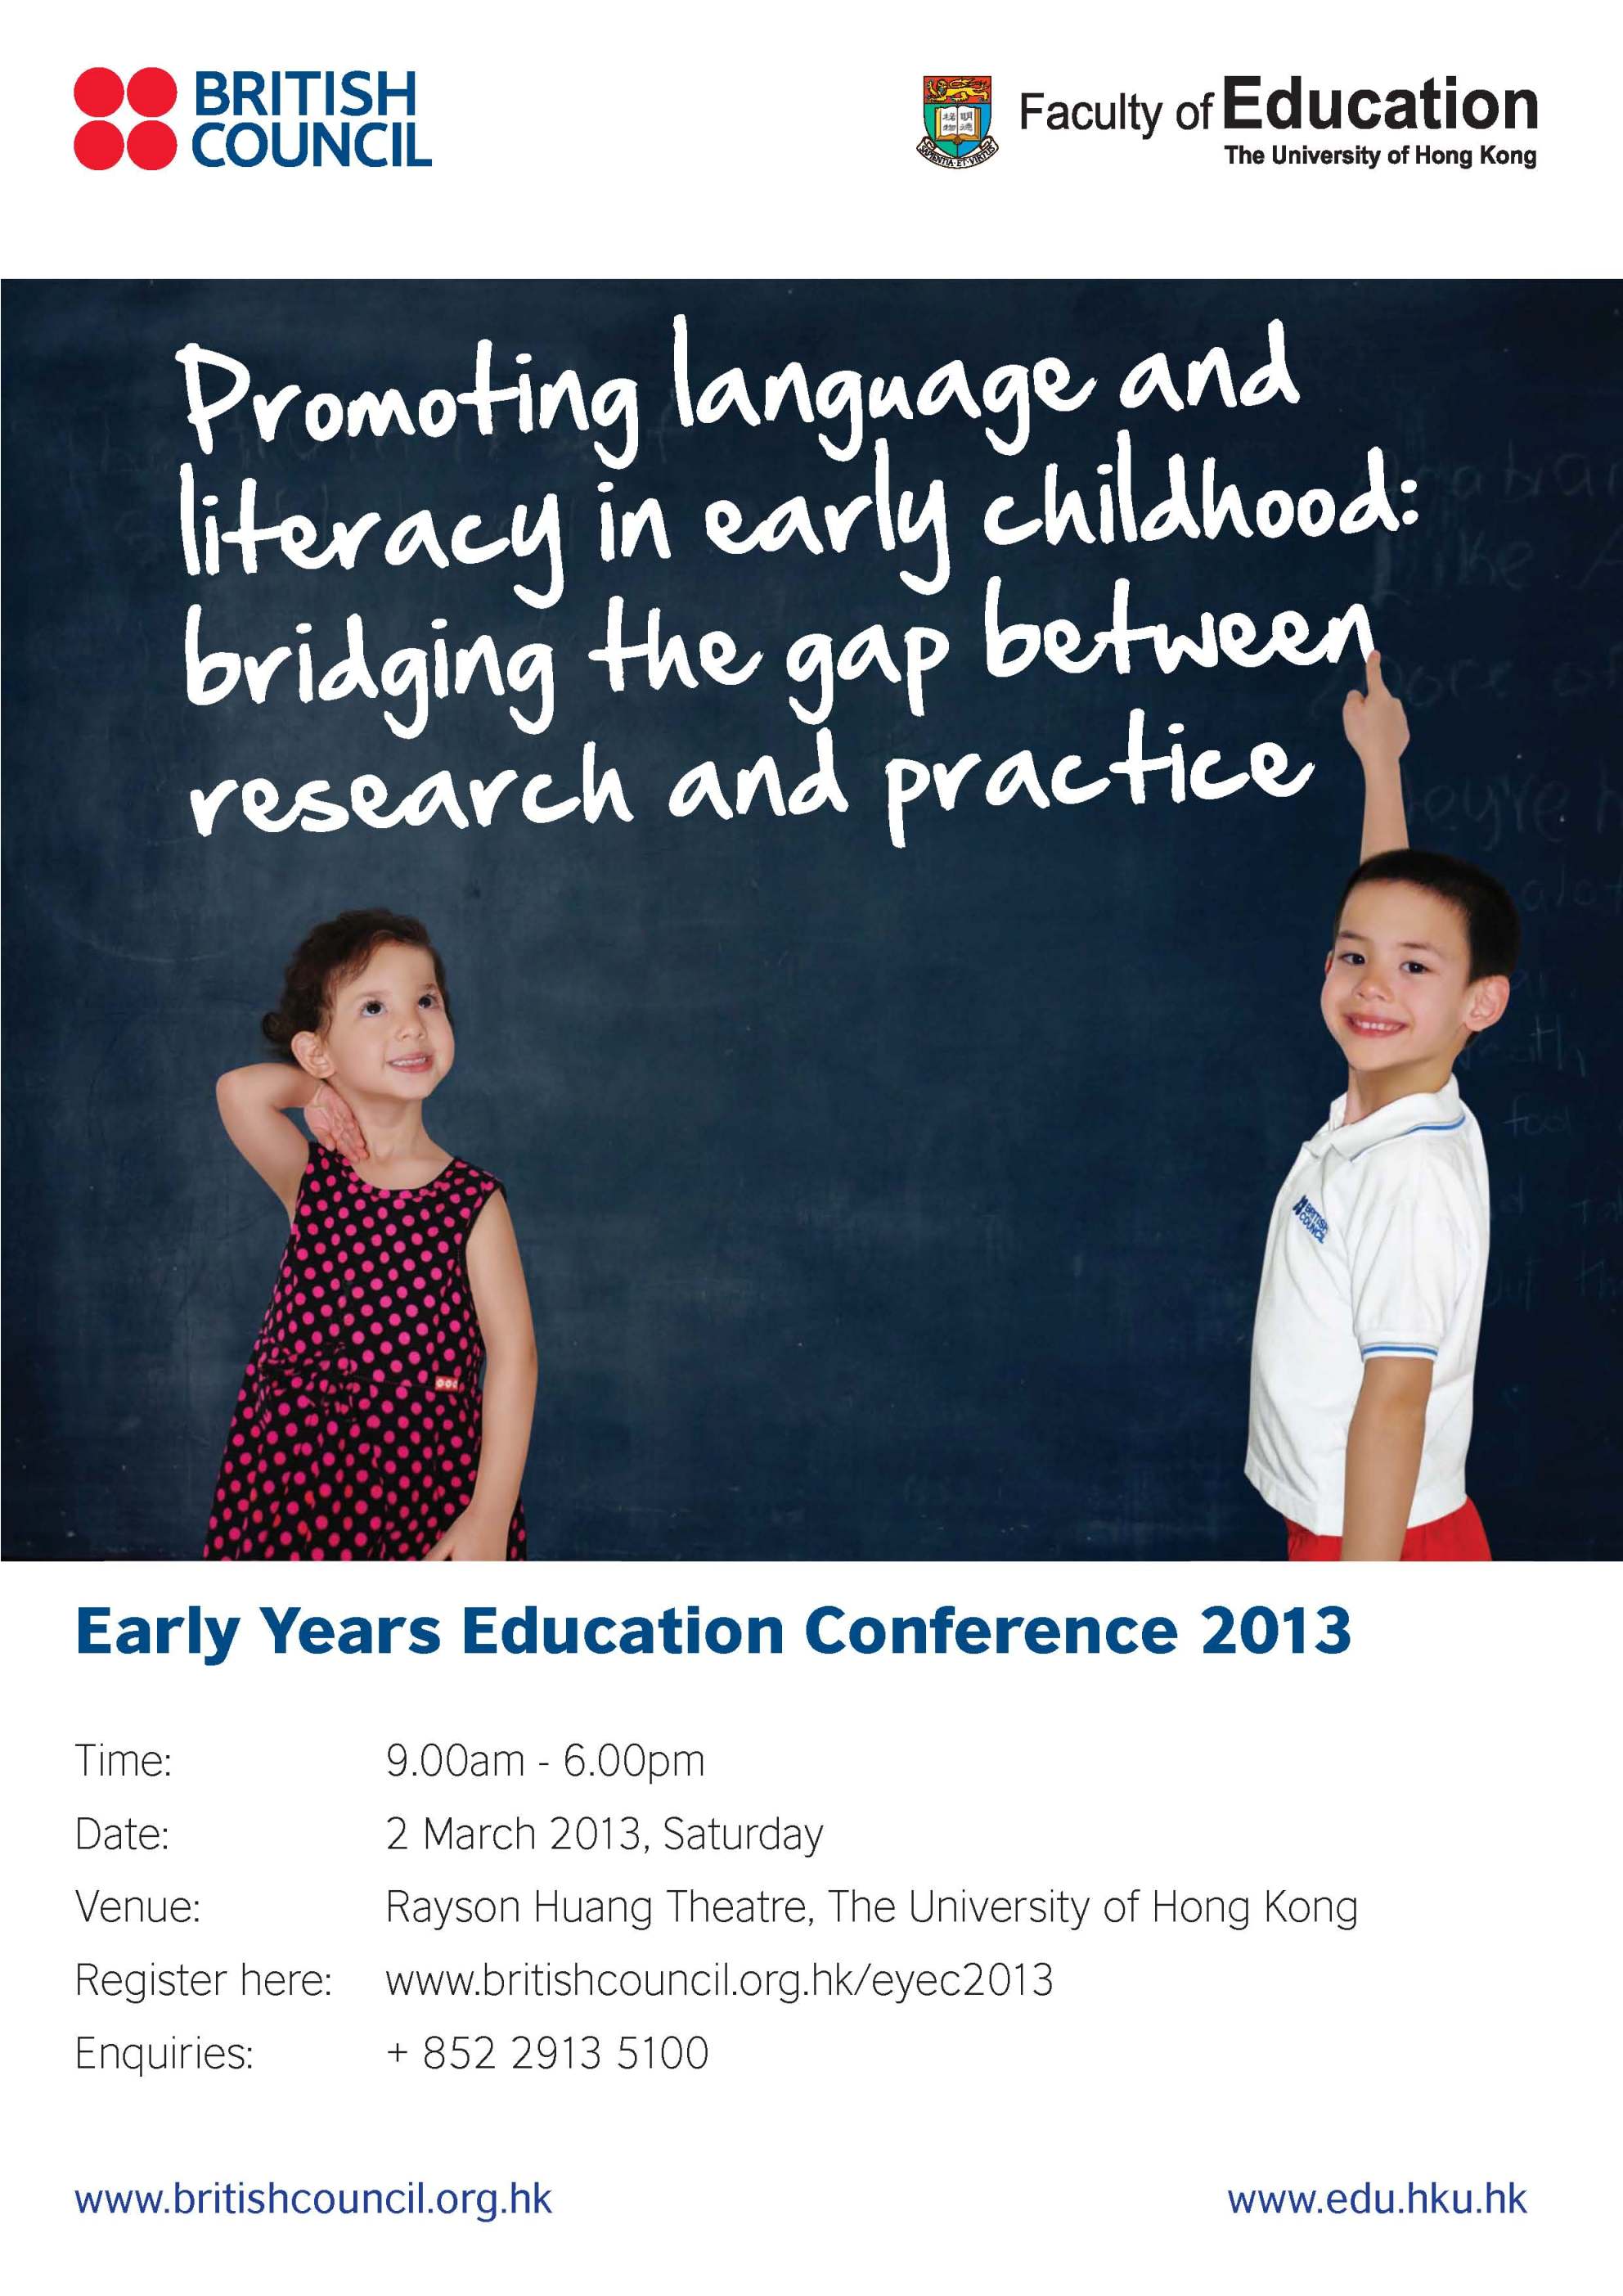 Early Years Education Conference 2013